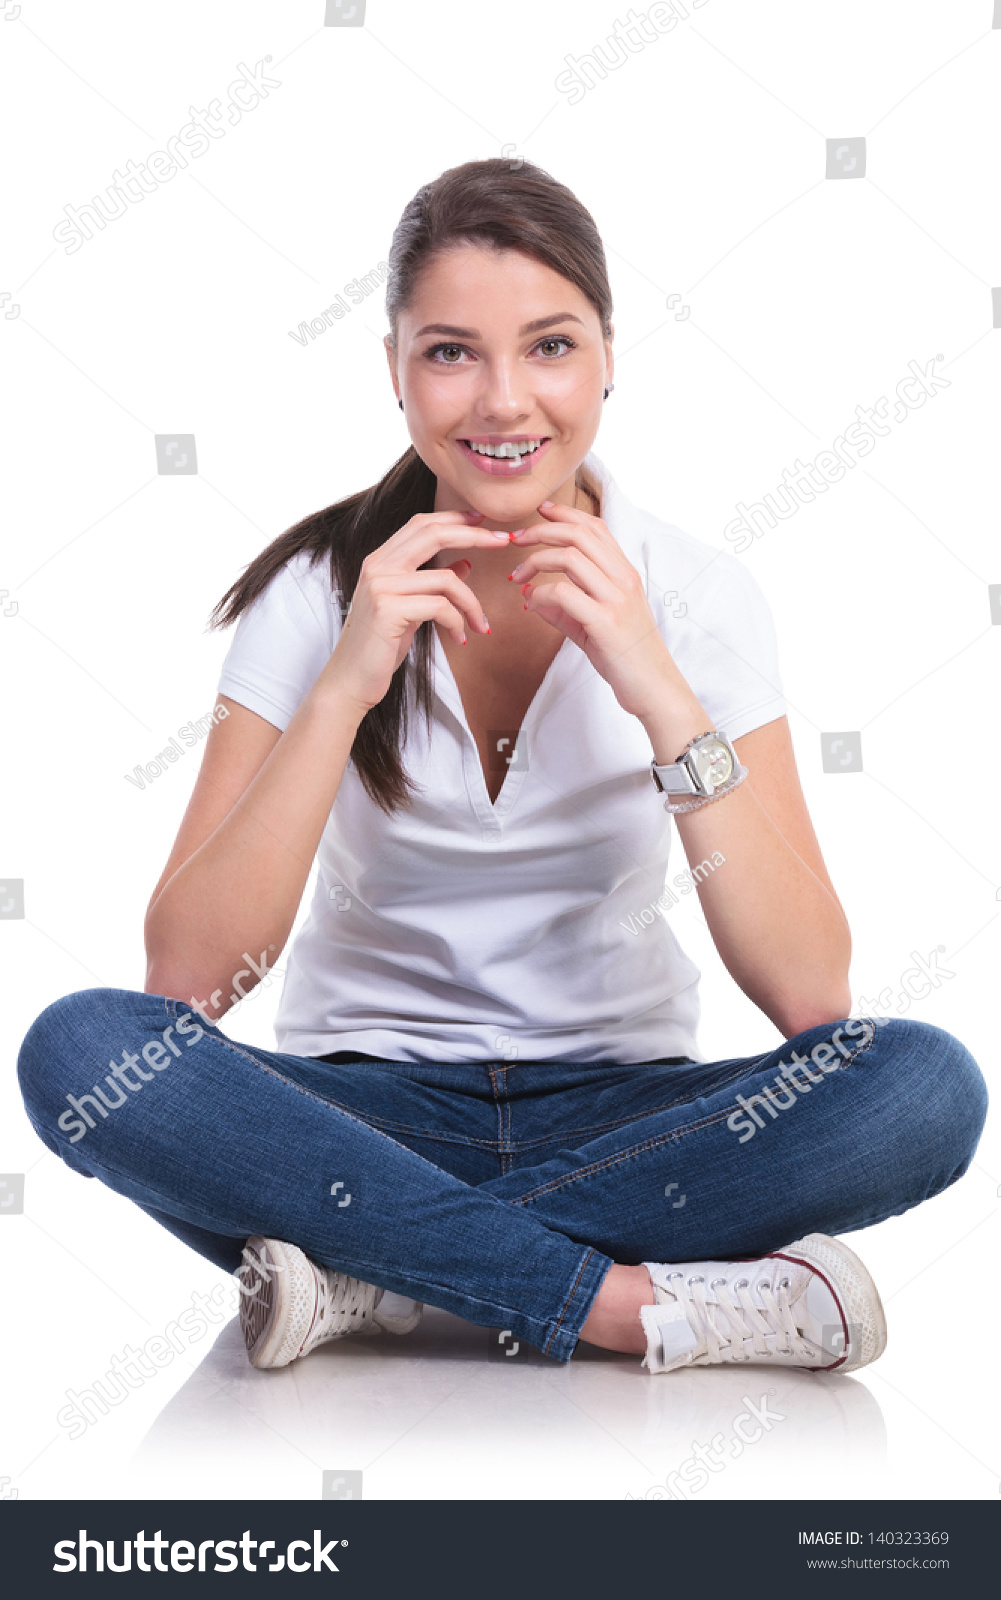 Casual Young Woman Sitting Legs Crossed Stock Photo 140323369 ...